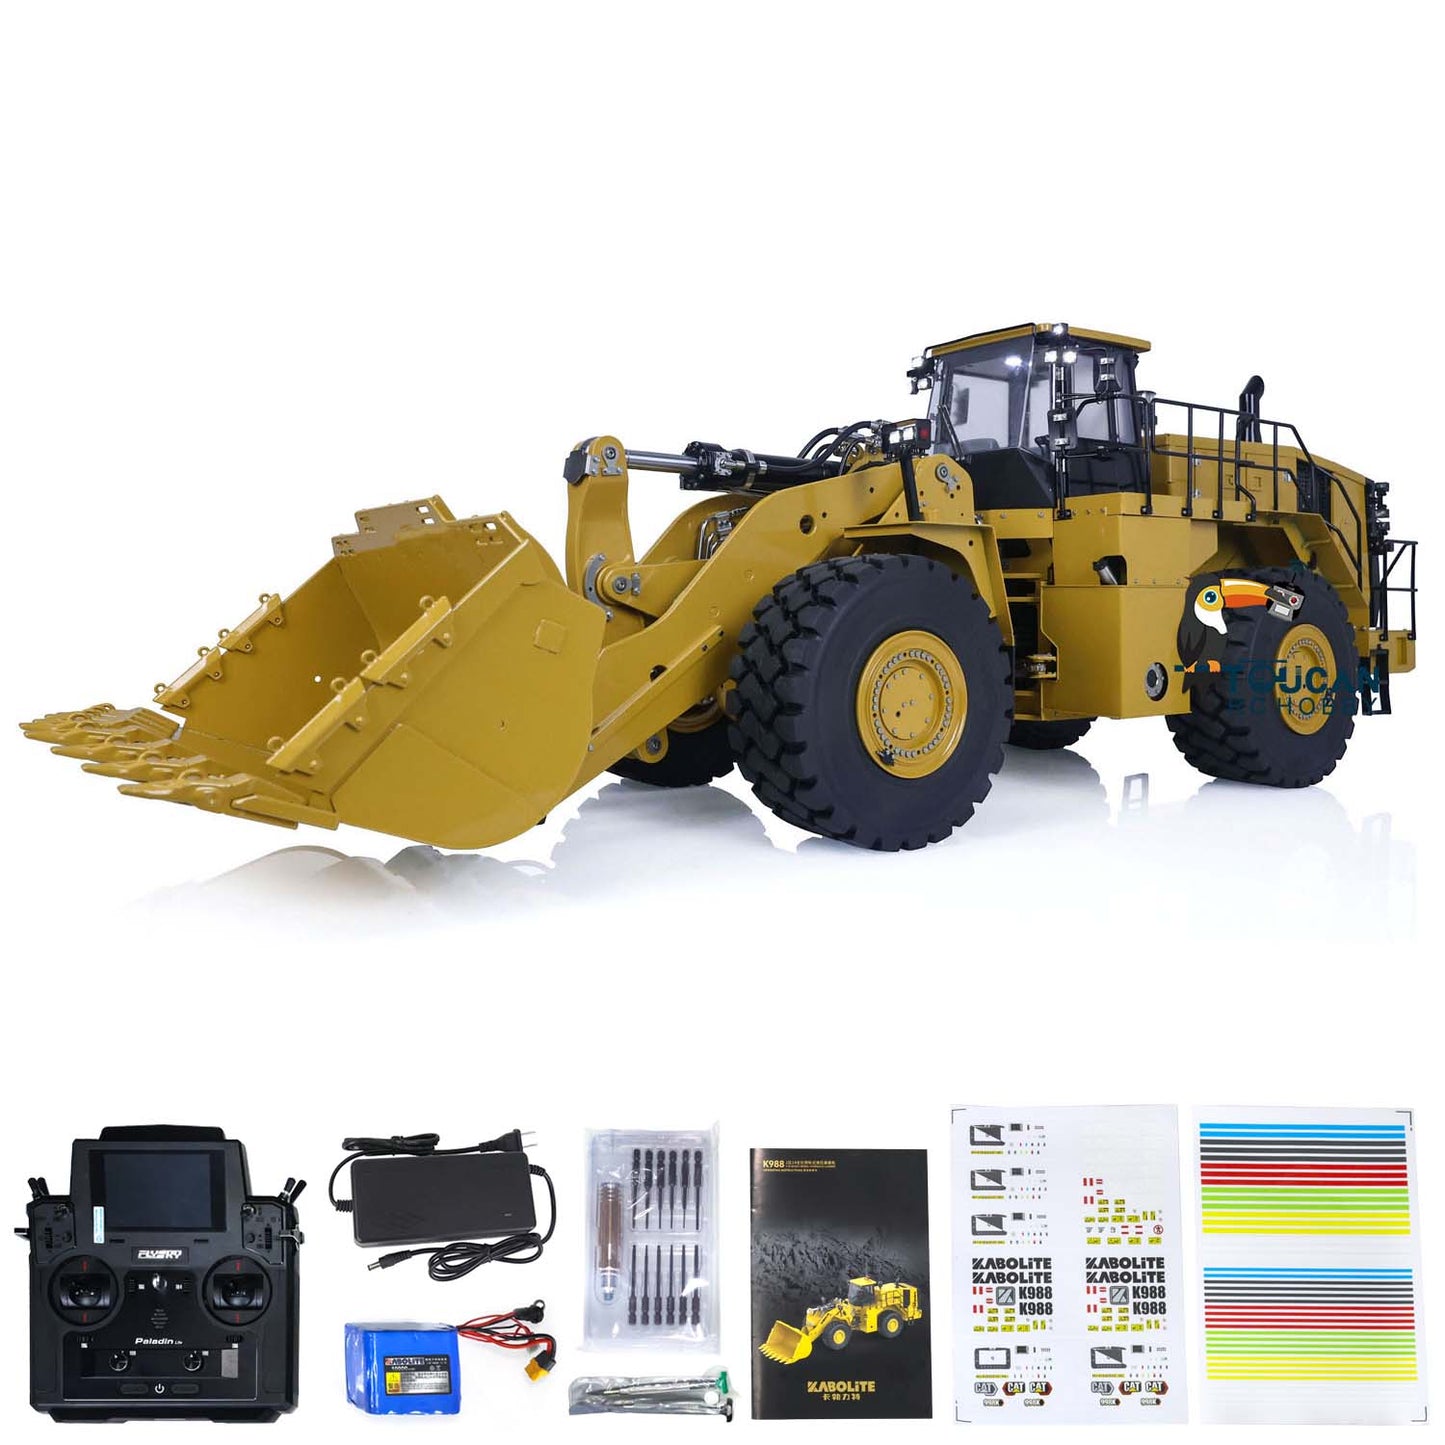 IN STOCK Kabolite K988 1/14 PL18 Lite Hydraulic RC Loader Radio Control Truck Emulated Car Truck Model Upgraded Version Painted Assembled